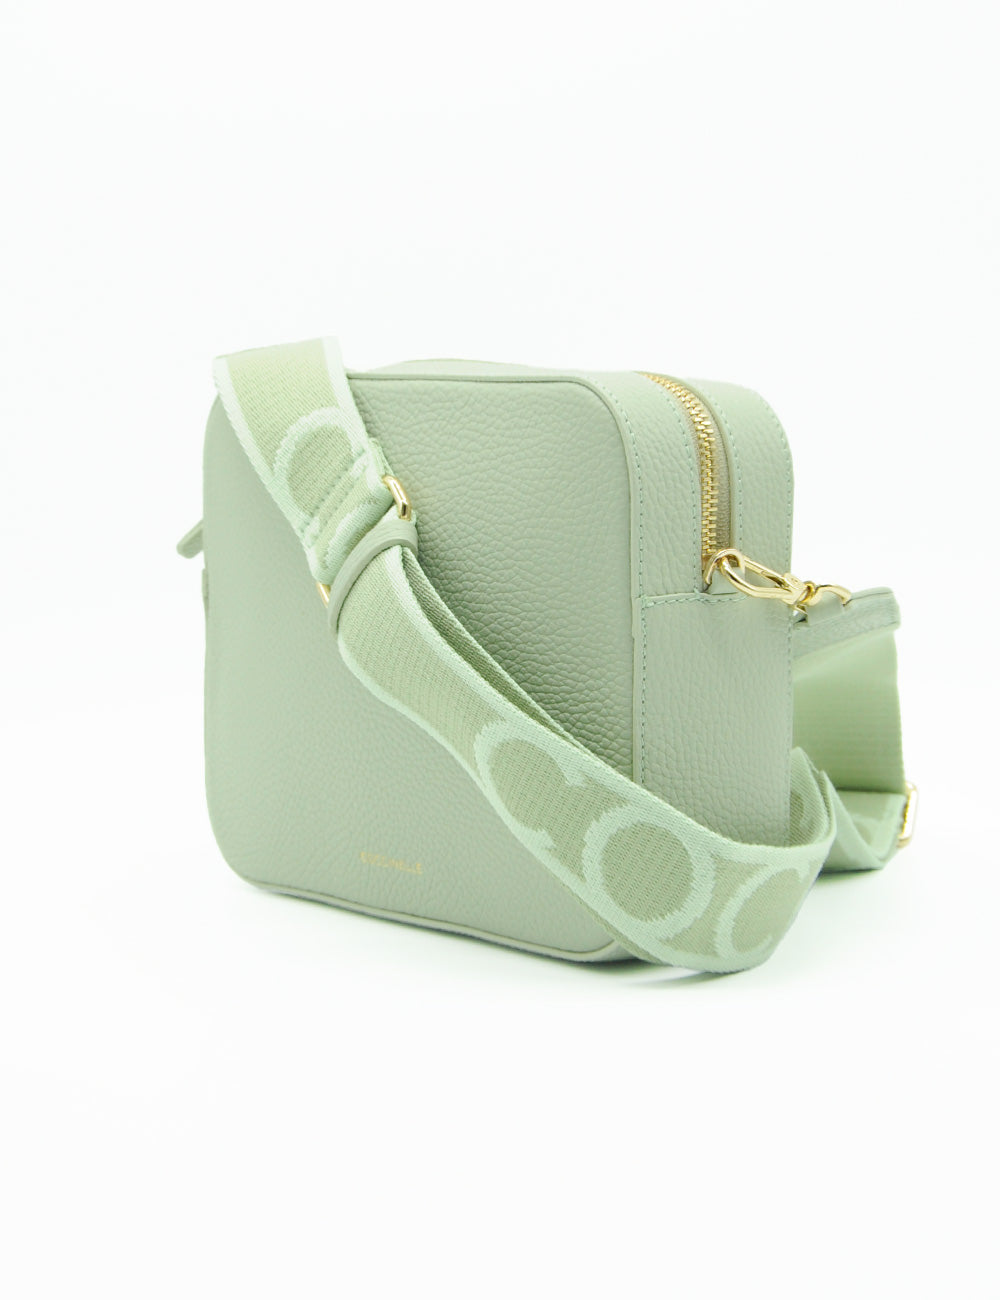 Coccinelle Tebe Large Celadon Green